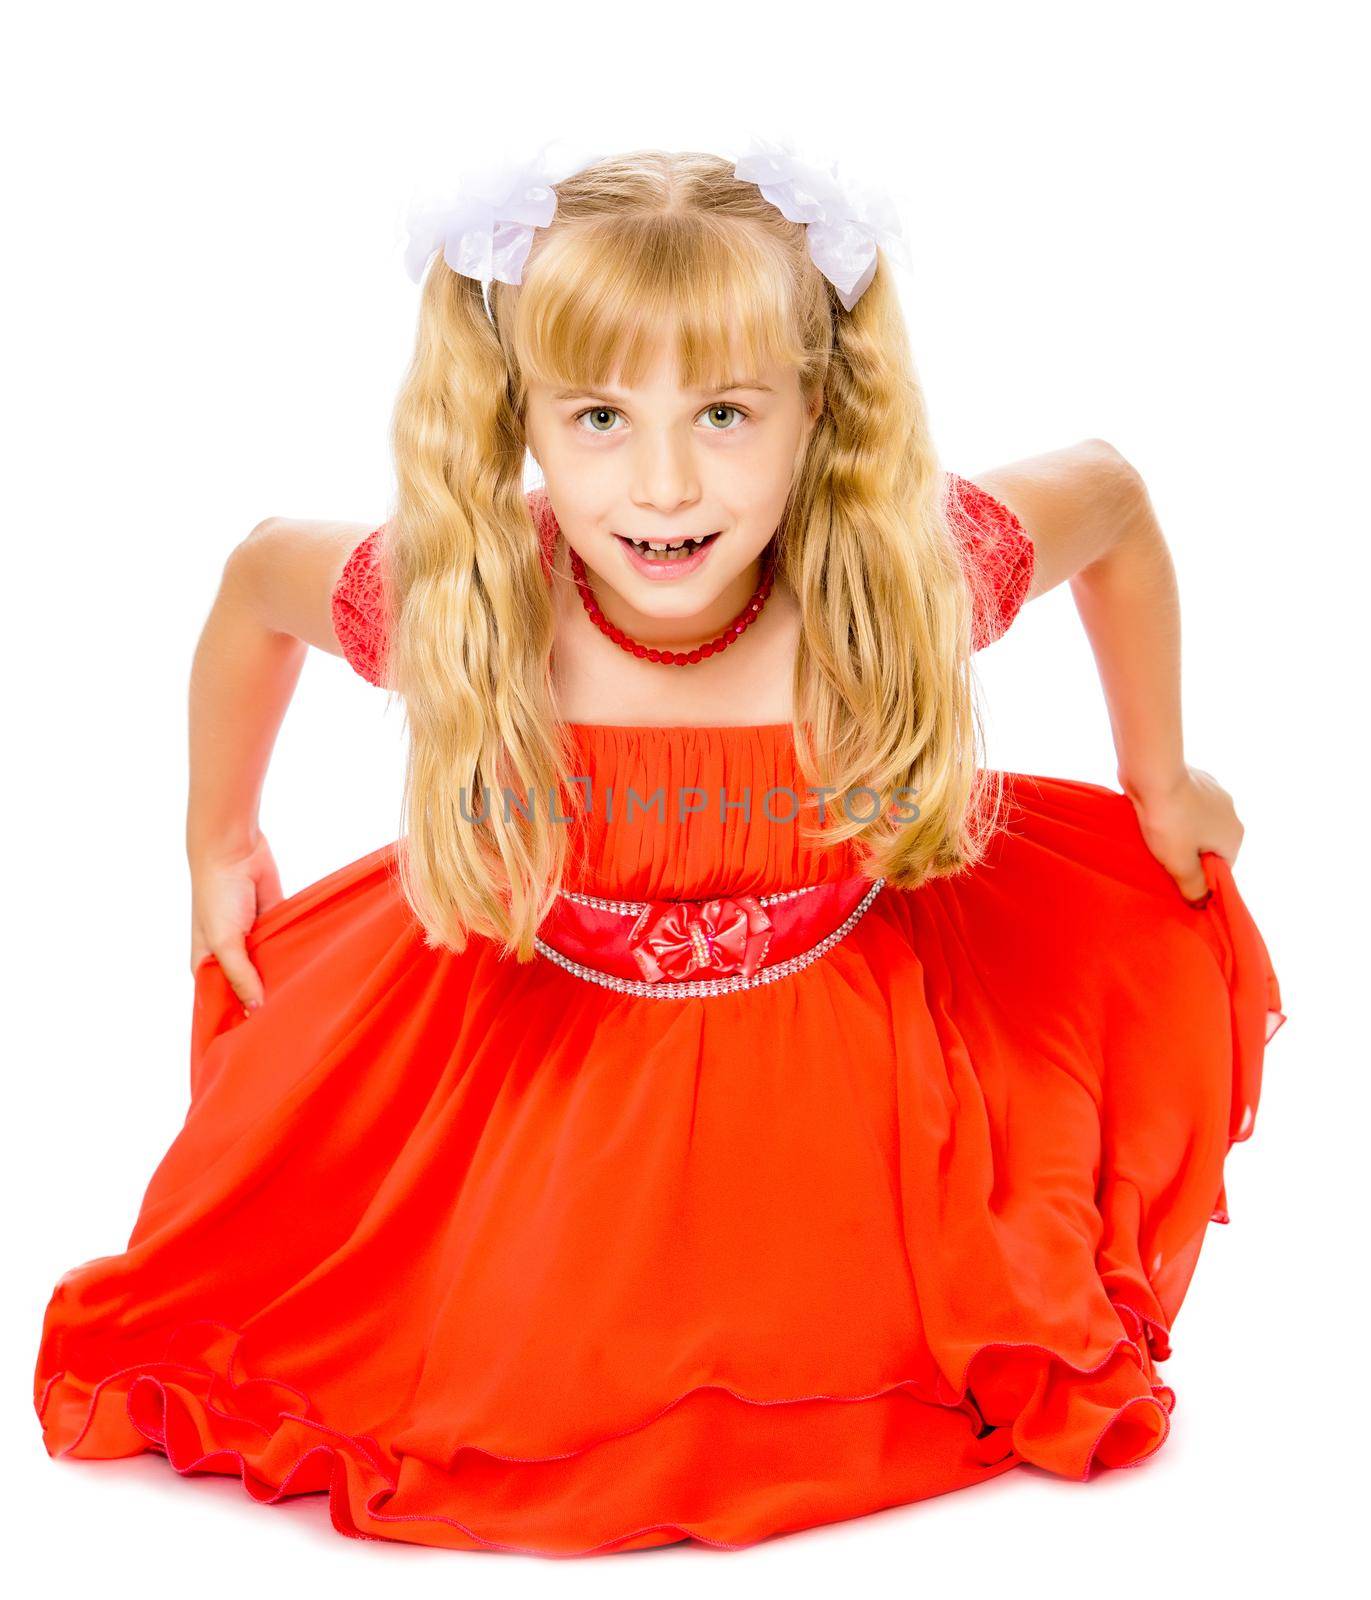 A beautiful little Caucasian girl with long, blonde ponytails on her head in a bright orange dress . Sat down on the floor-Isolated on white background